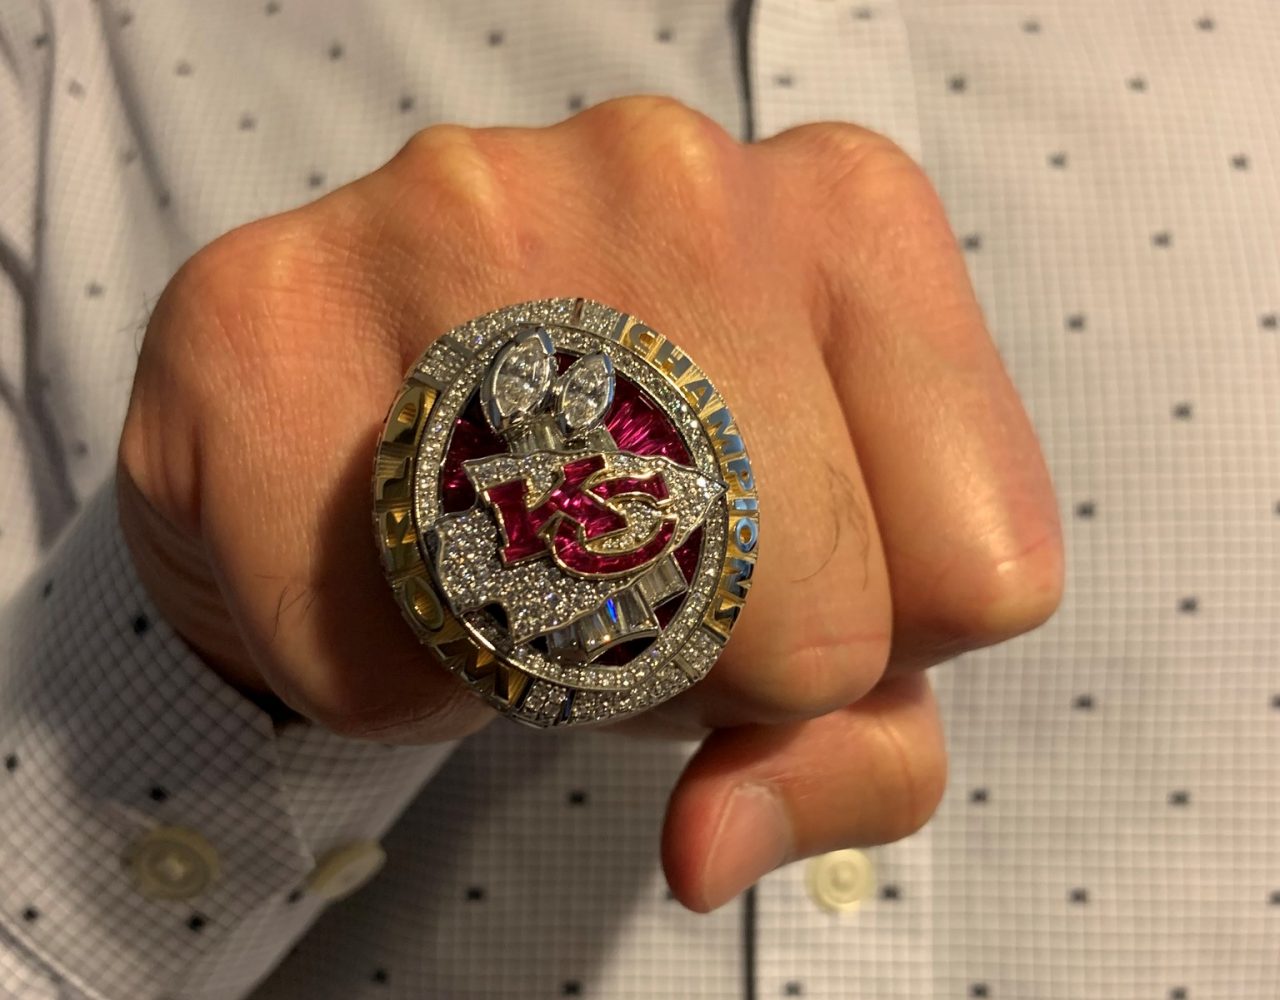 A Kansas City Chiefs Super Bowl ring displayed on a man's hand with his torso in the background.